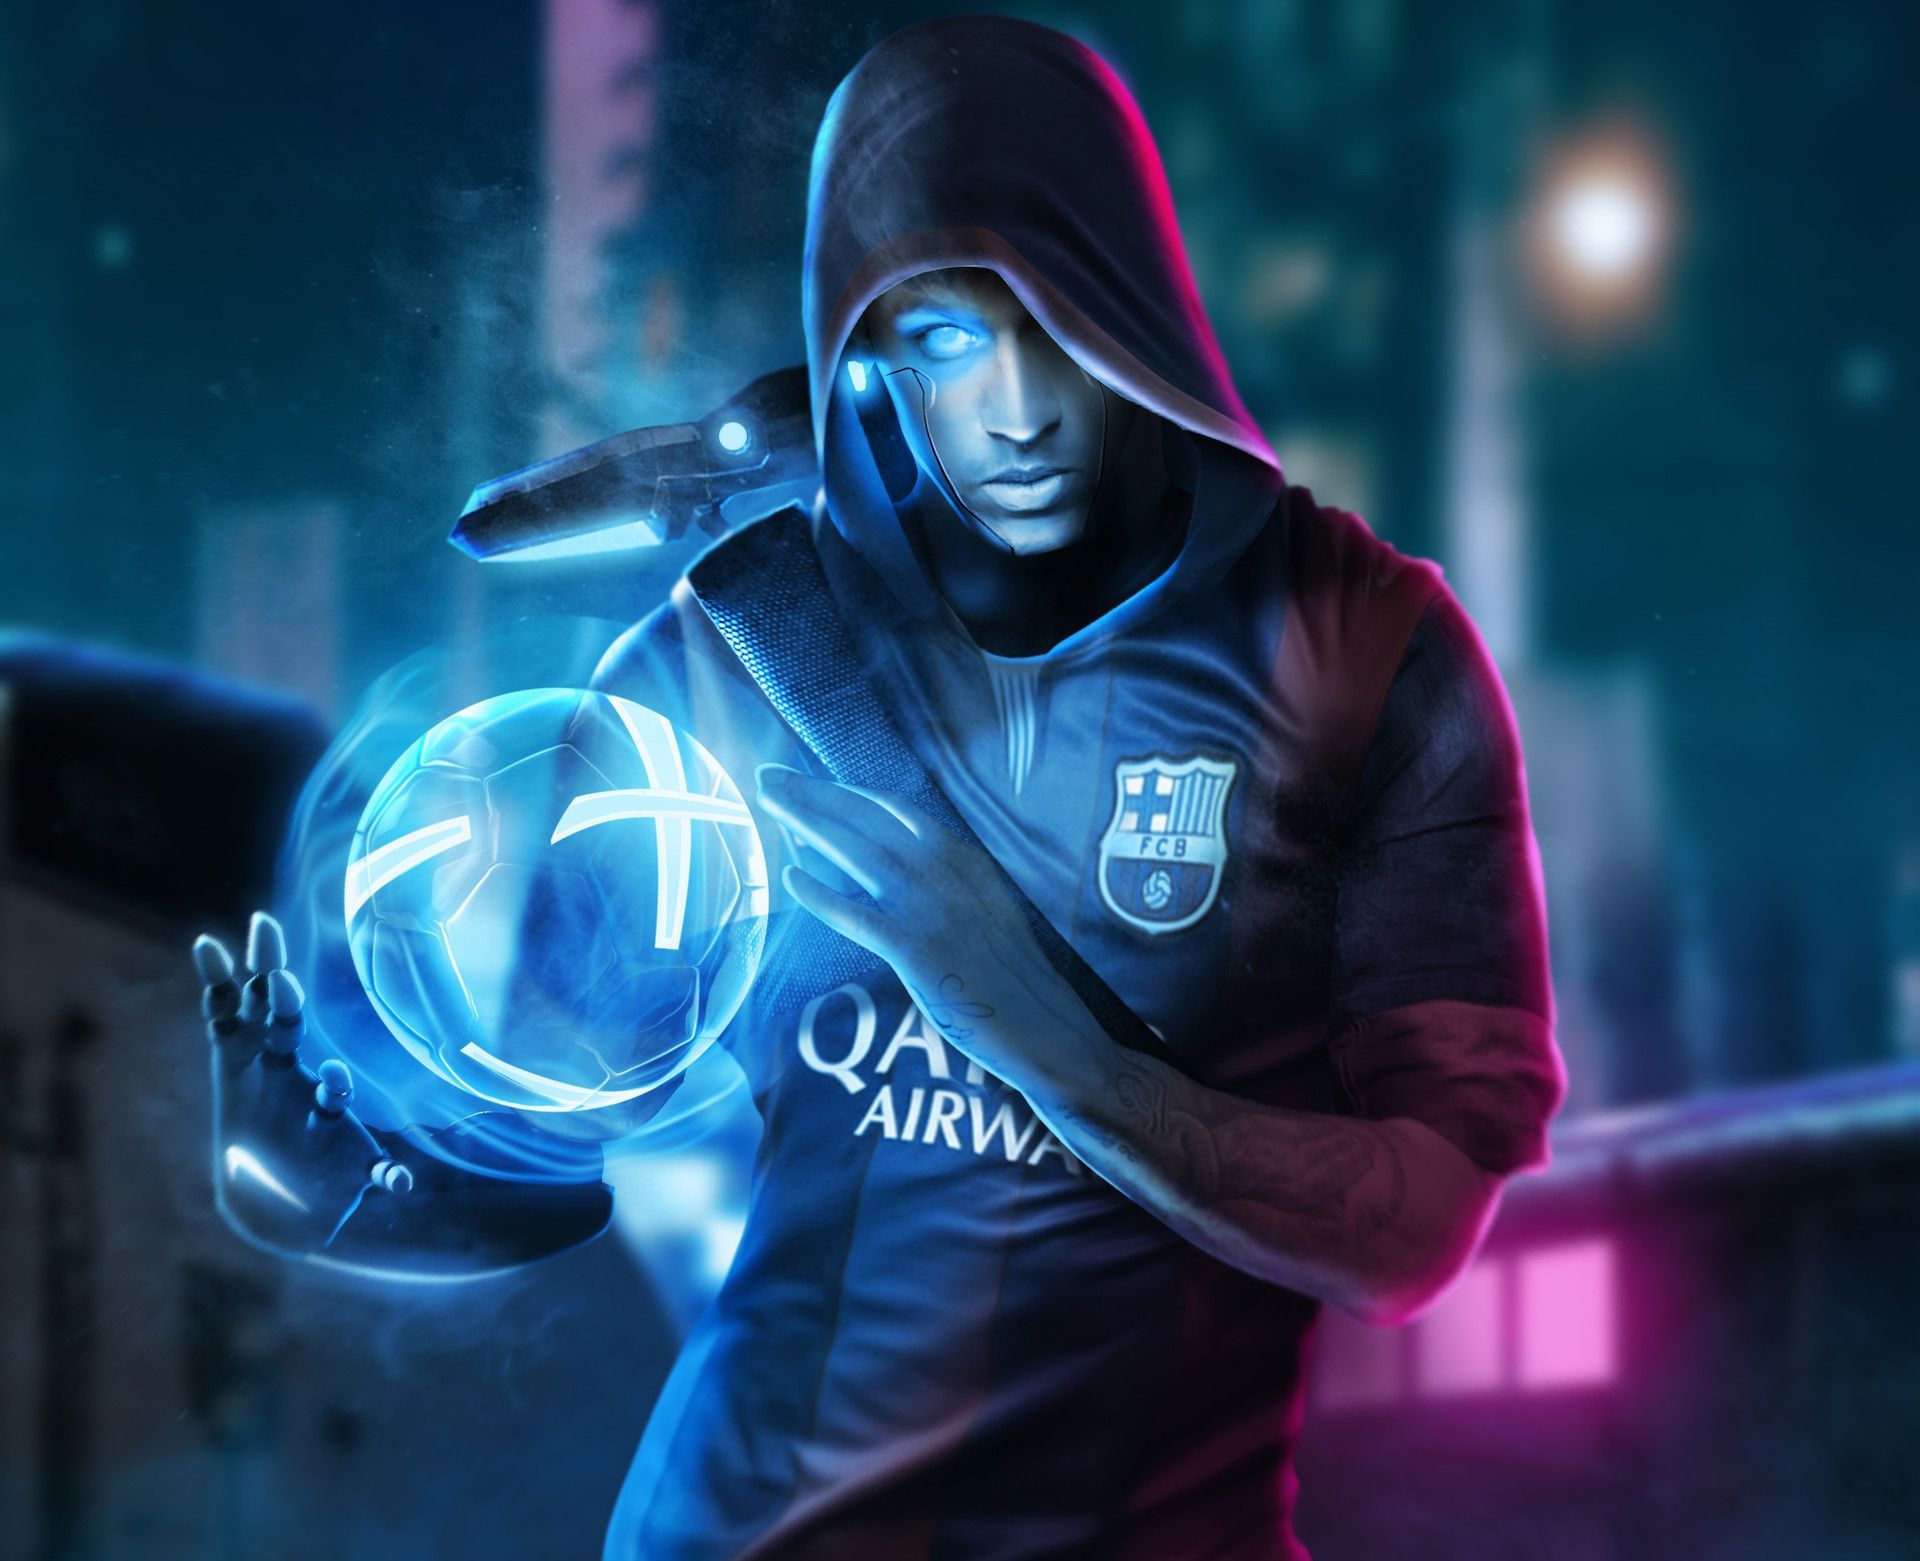 Mobile wallpaper: Sports, Soccer, Neymar, 519415 download the picture for free